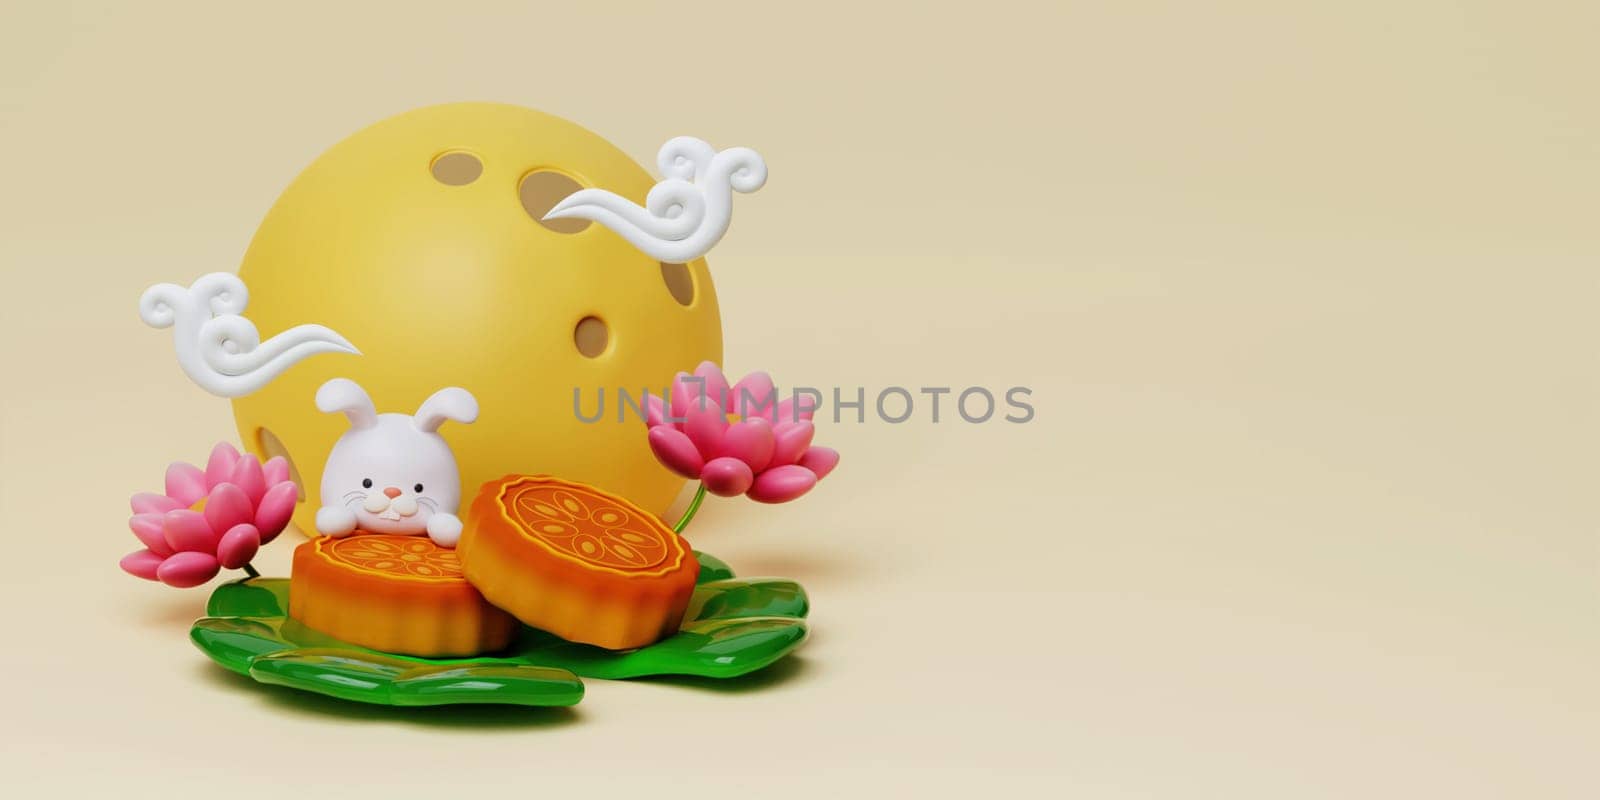 3d cute rabbits on baked mooncake with lotus and full moon on yellow background. Chinese palace aside. Translation: Happy mid autumn festival. 3d render by meepiangraphic